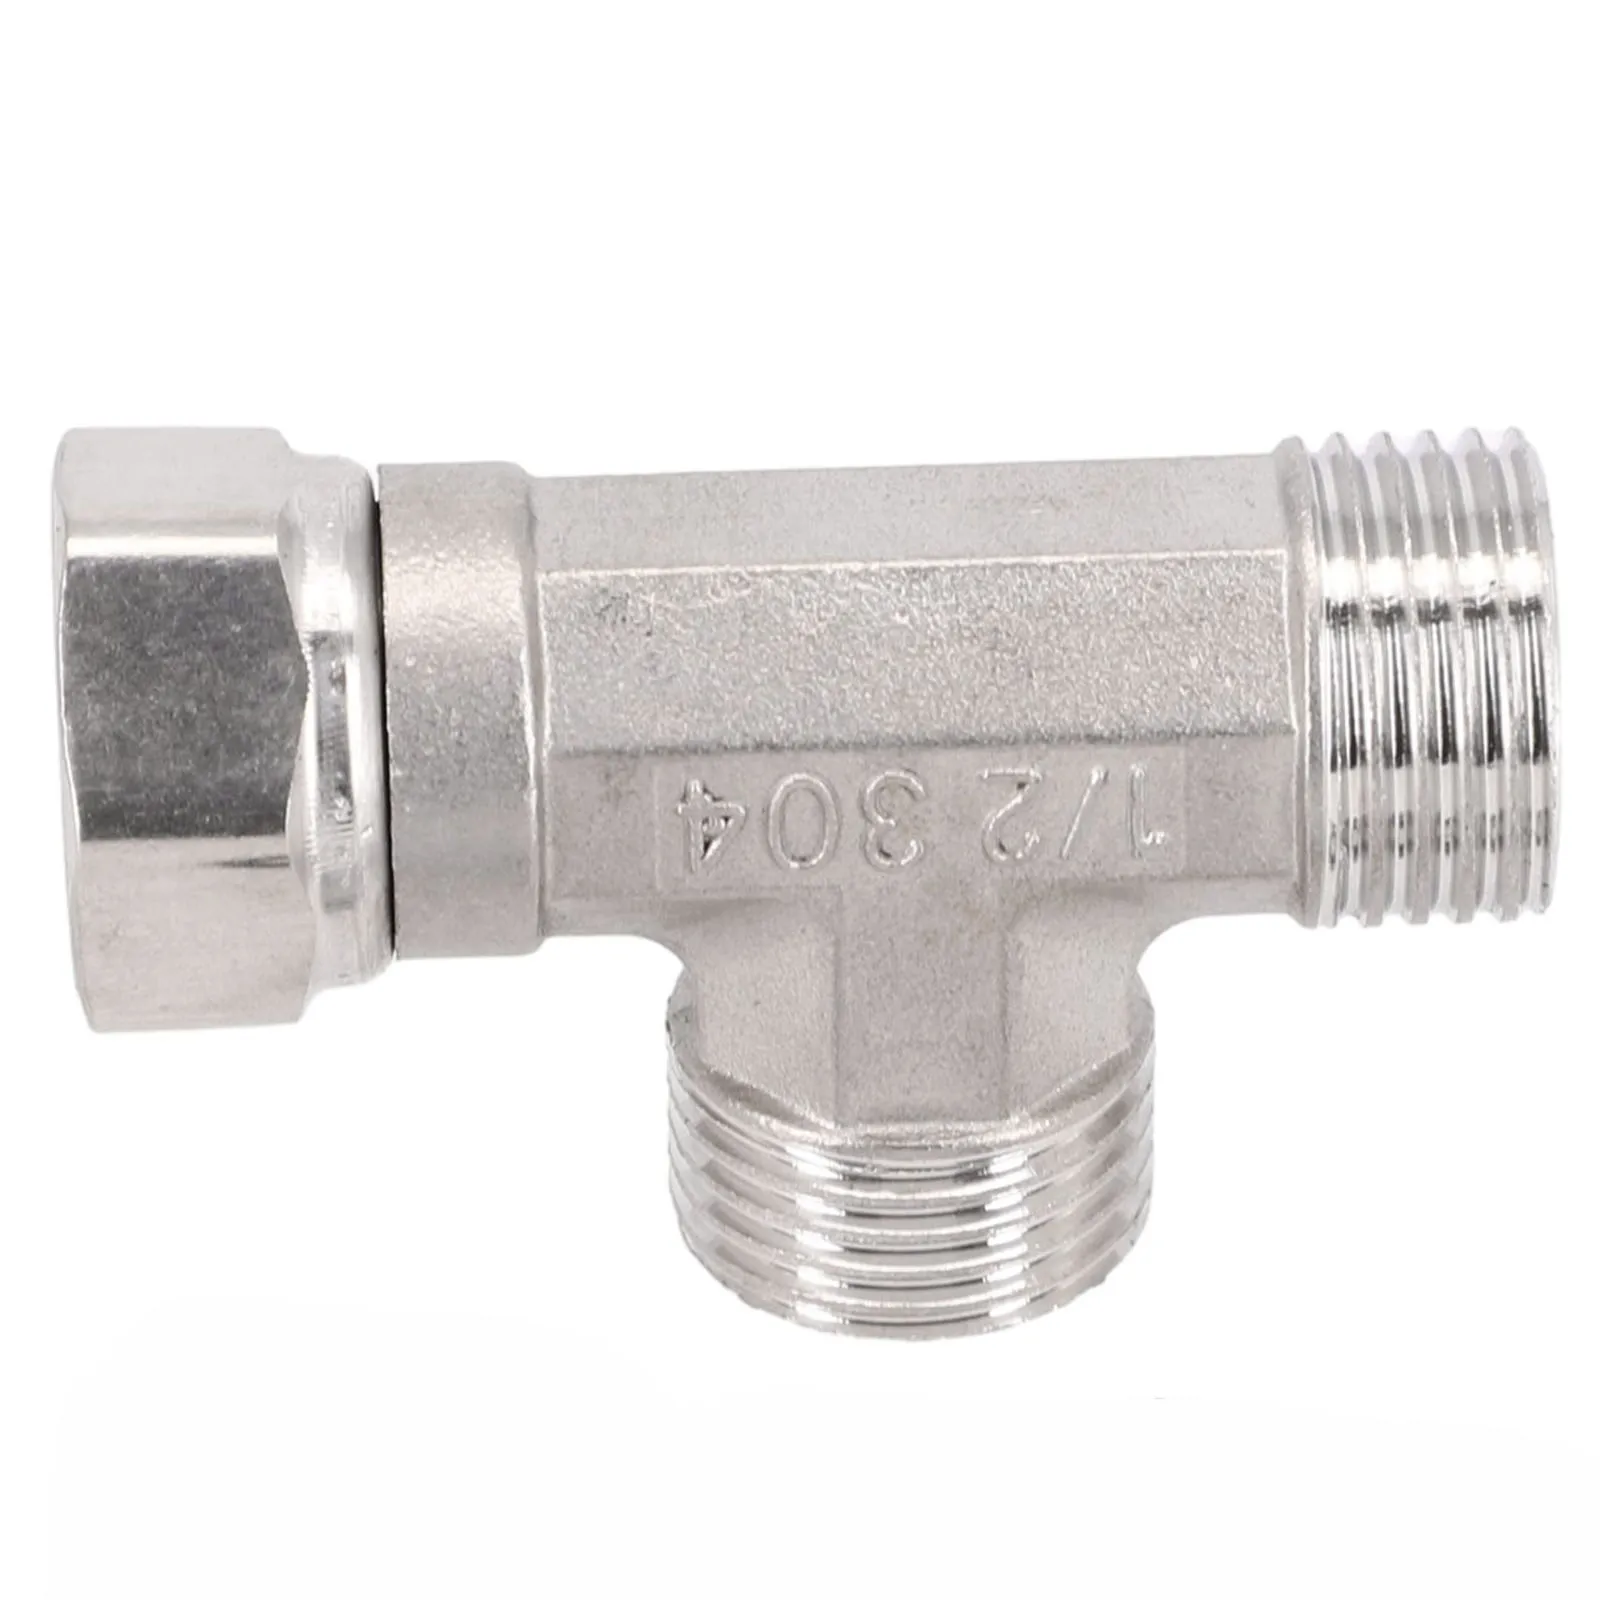 

Ideal T Adapter 3 Ways Valve for Bathroom Toilet Durable Stainless Steel Premium Safety Features Enjoy High Water Pressure